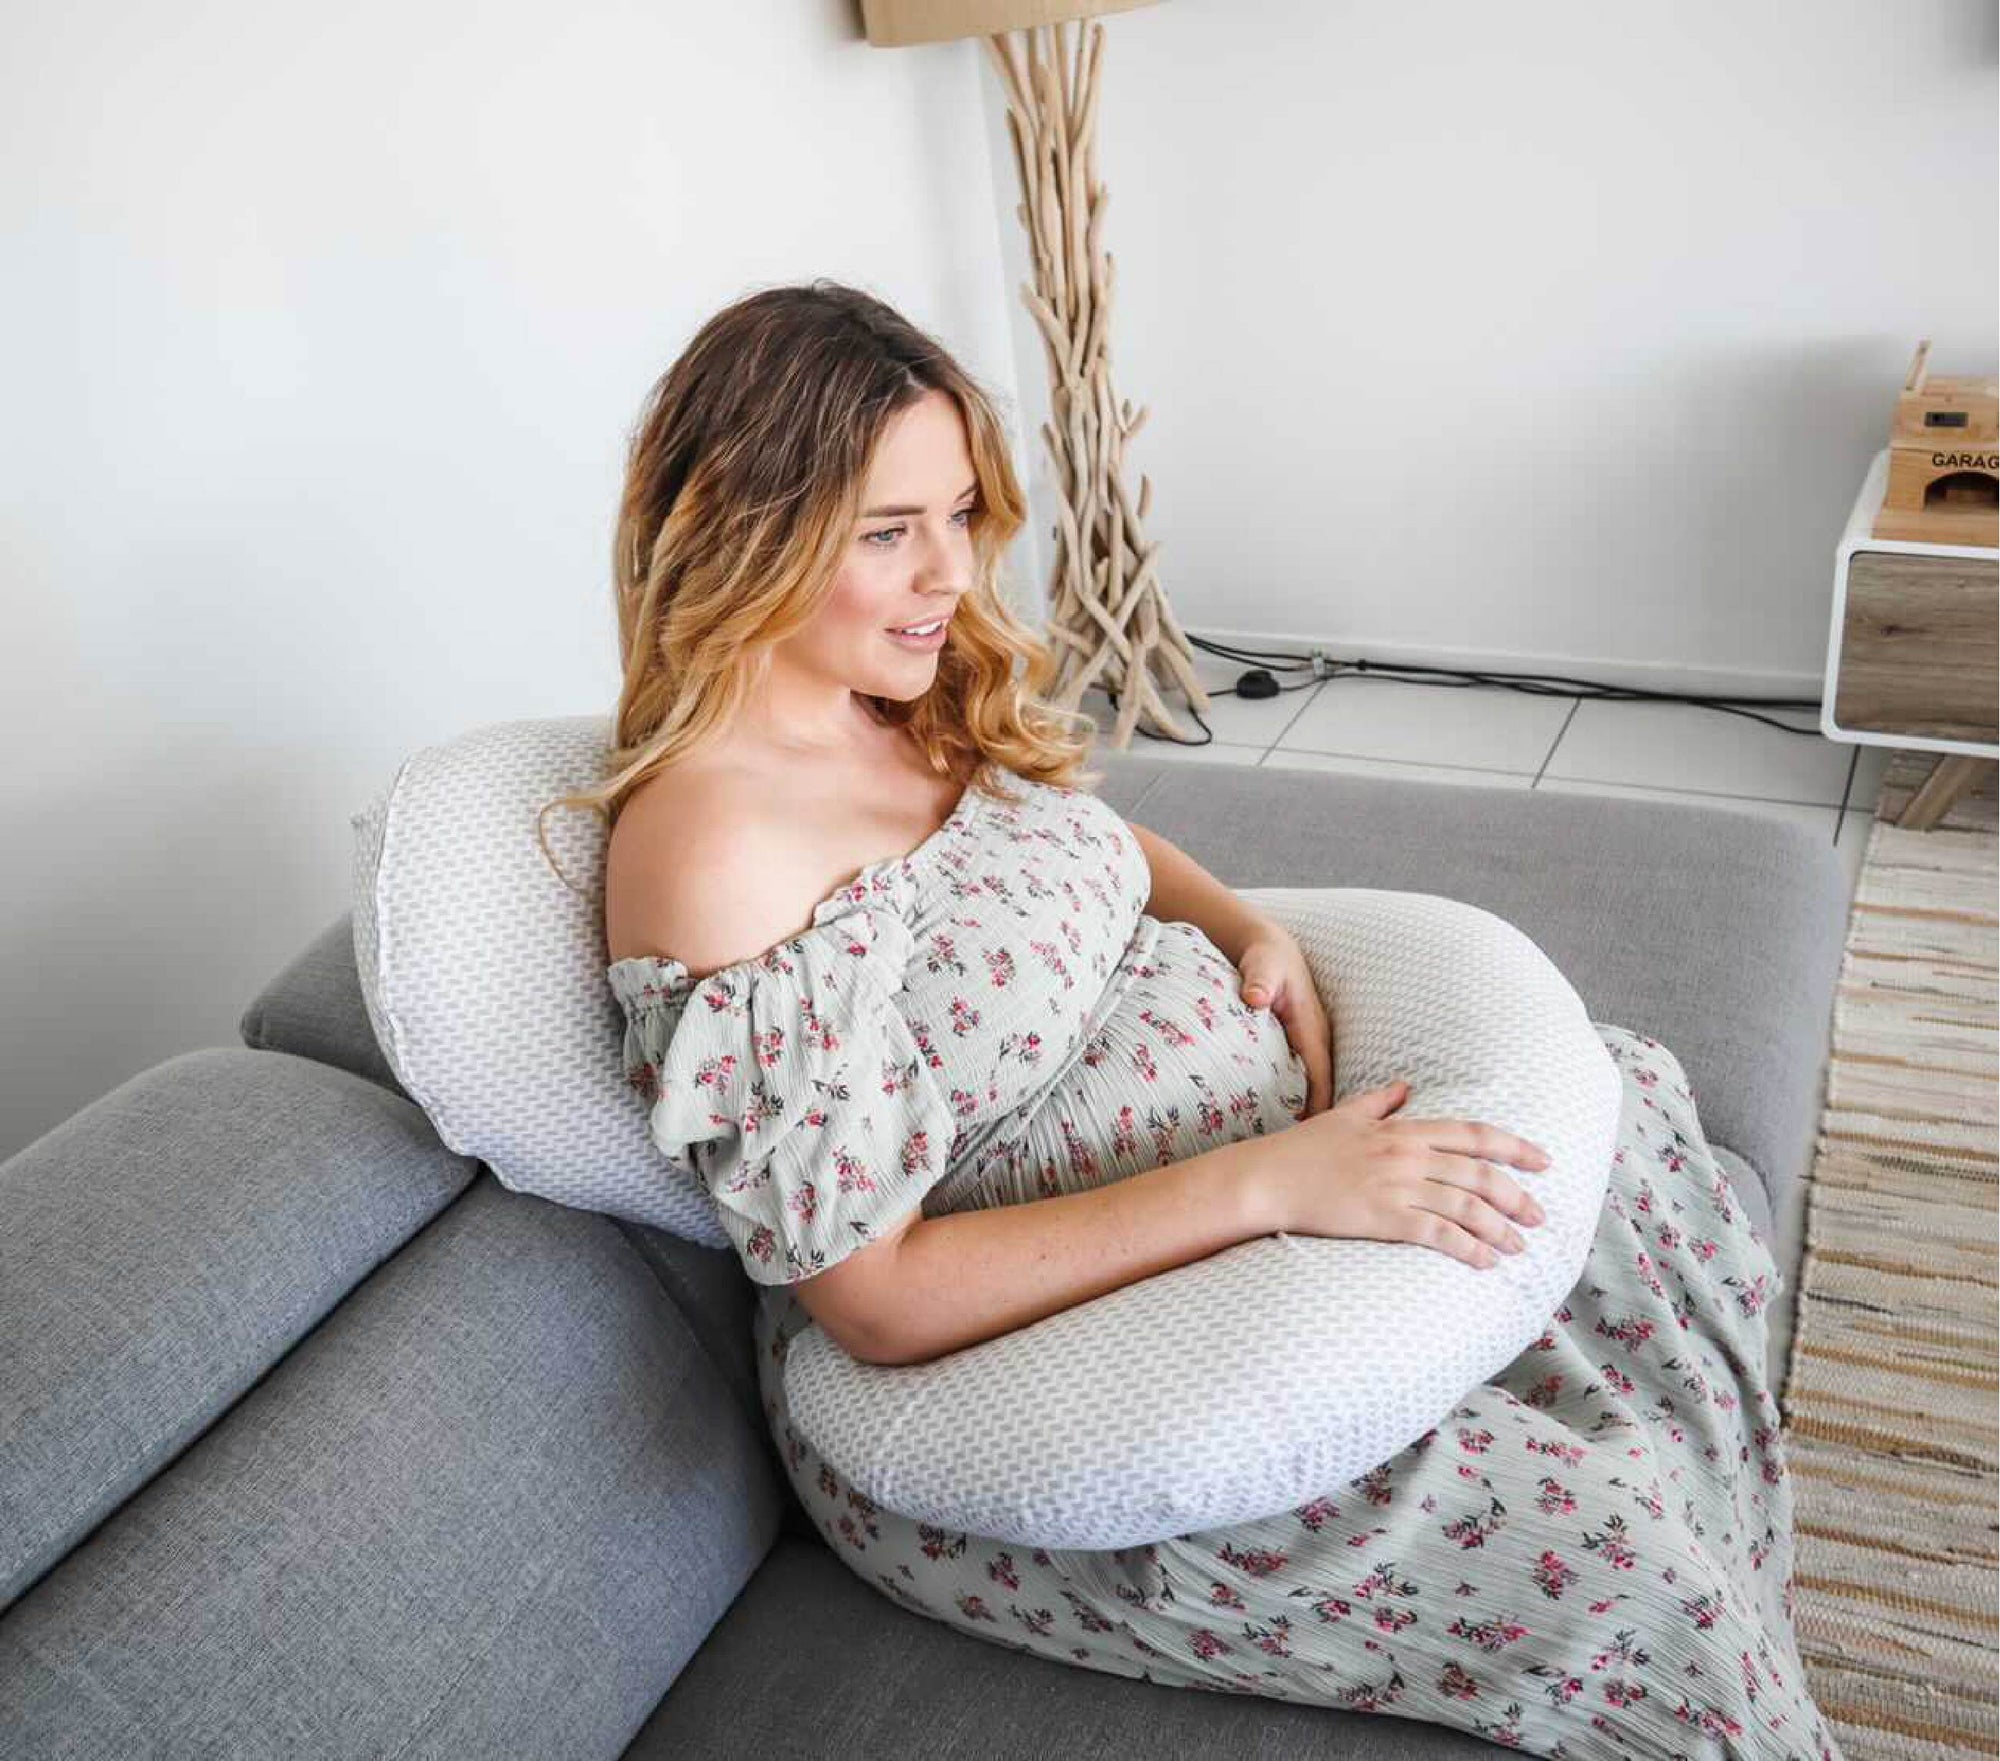 ultimate body pillow / breast feeding pillow - gingham beige